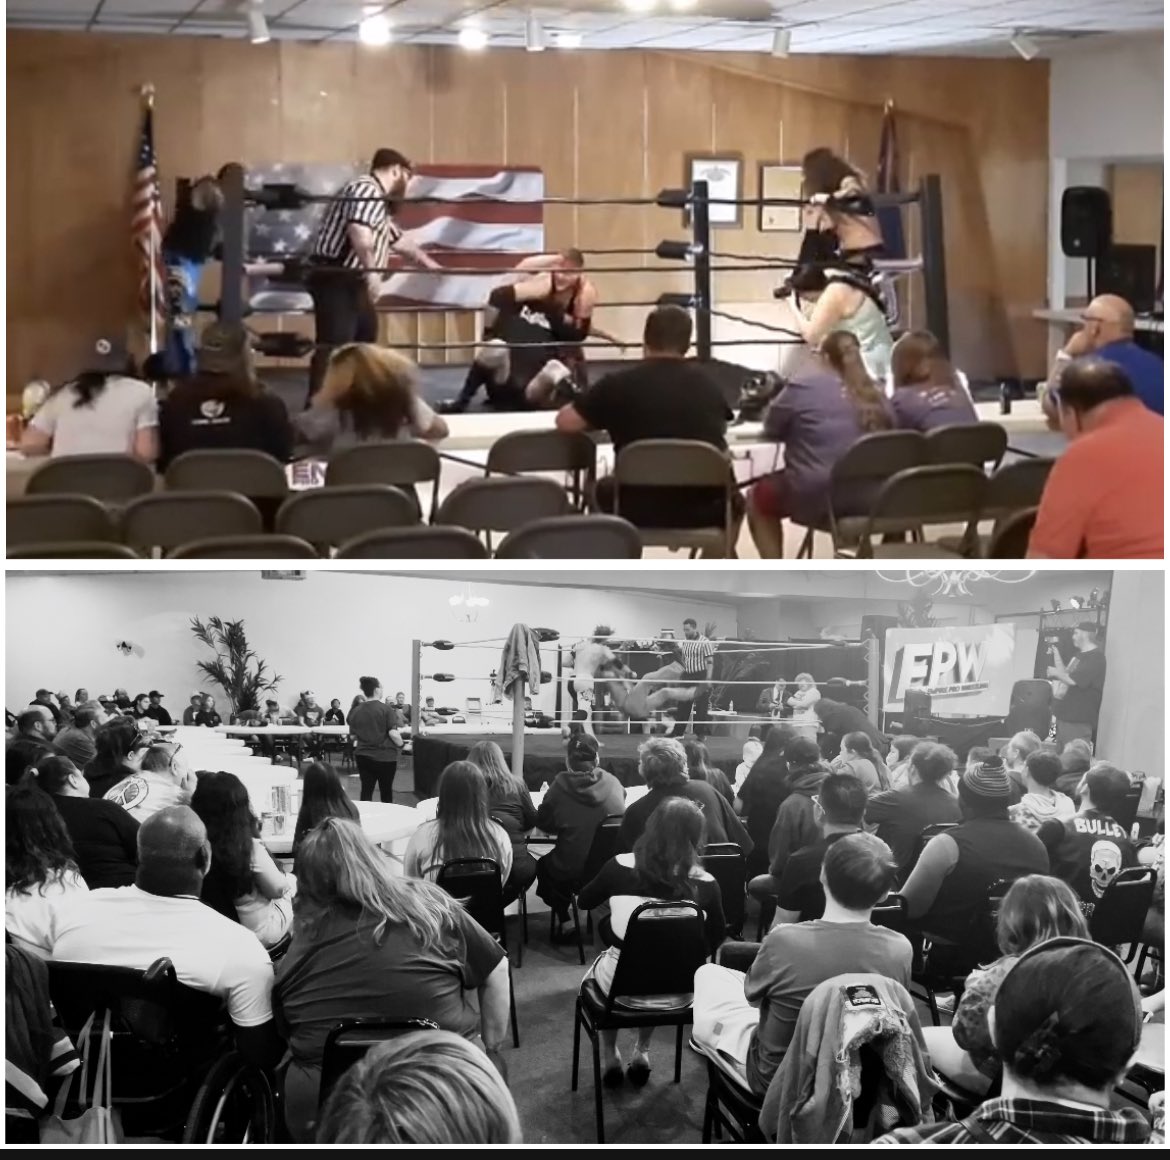 How it started - How it’s going. 
You’ve got to start somewhere and for us it was the local VFW. #EPW is committed to becoming Oklahoma’s premier wrestling organization: for fans, for wrestlers, for ALL who love this sport. 
We’re ready to enter our next phase of growth. #JoinUs